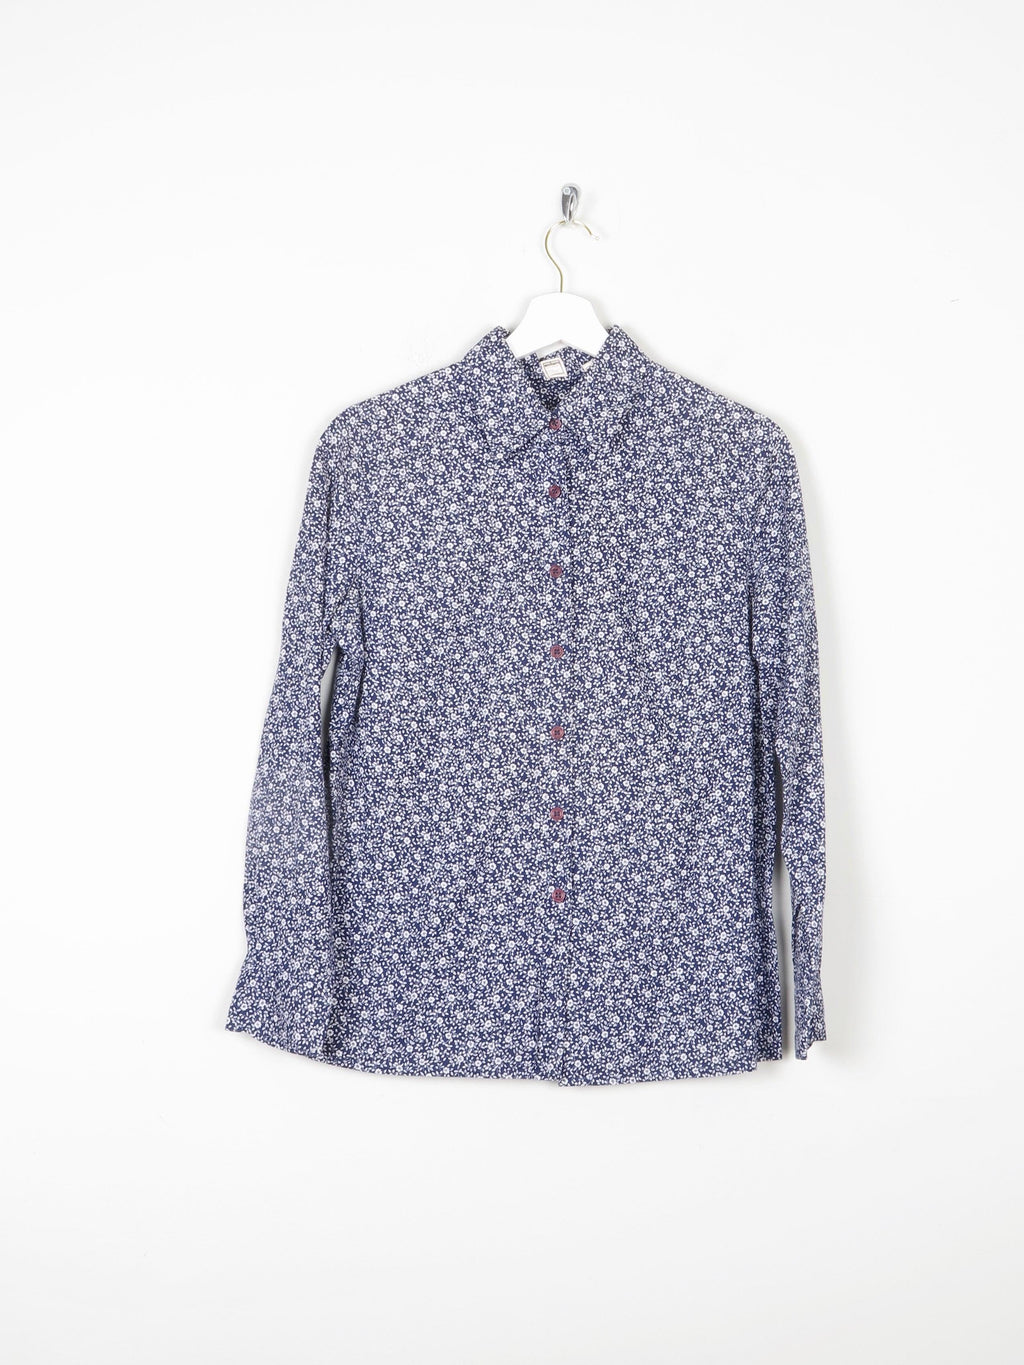 Women's Navy & White Floral Print Prairie Style Blouse With Collar 10 Approx - The Harlequin